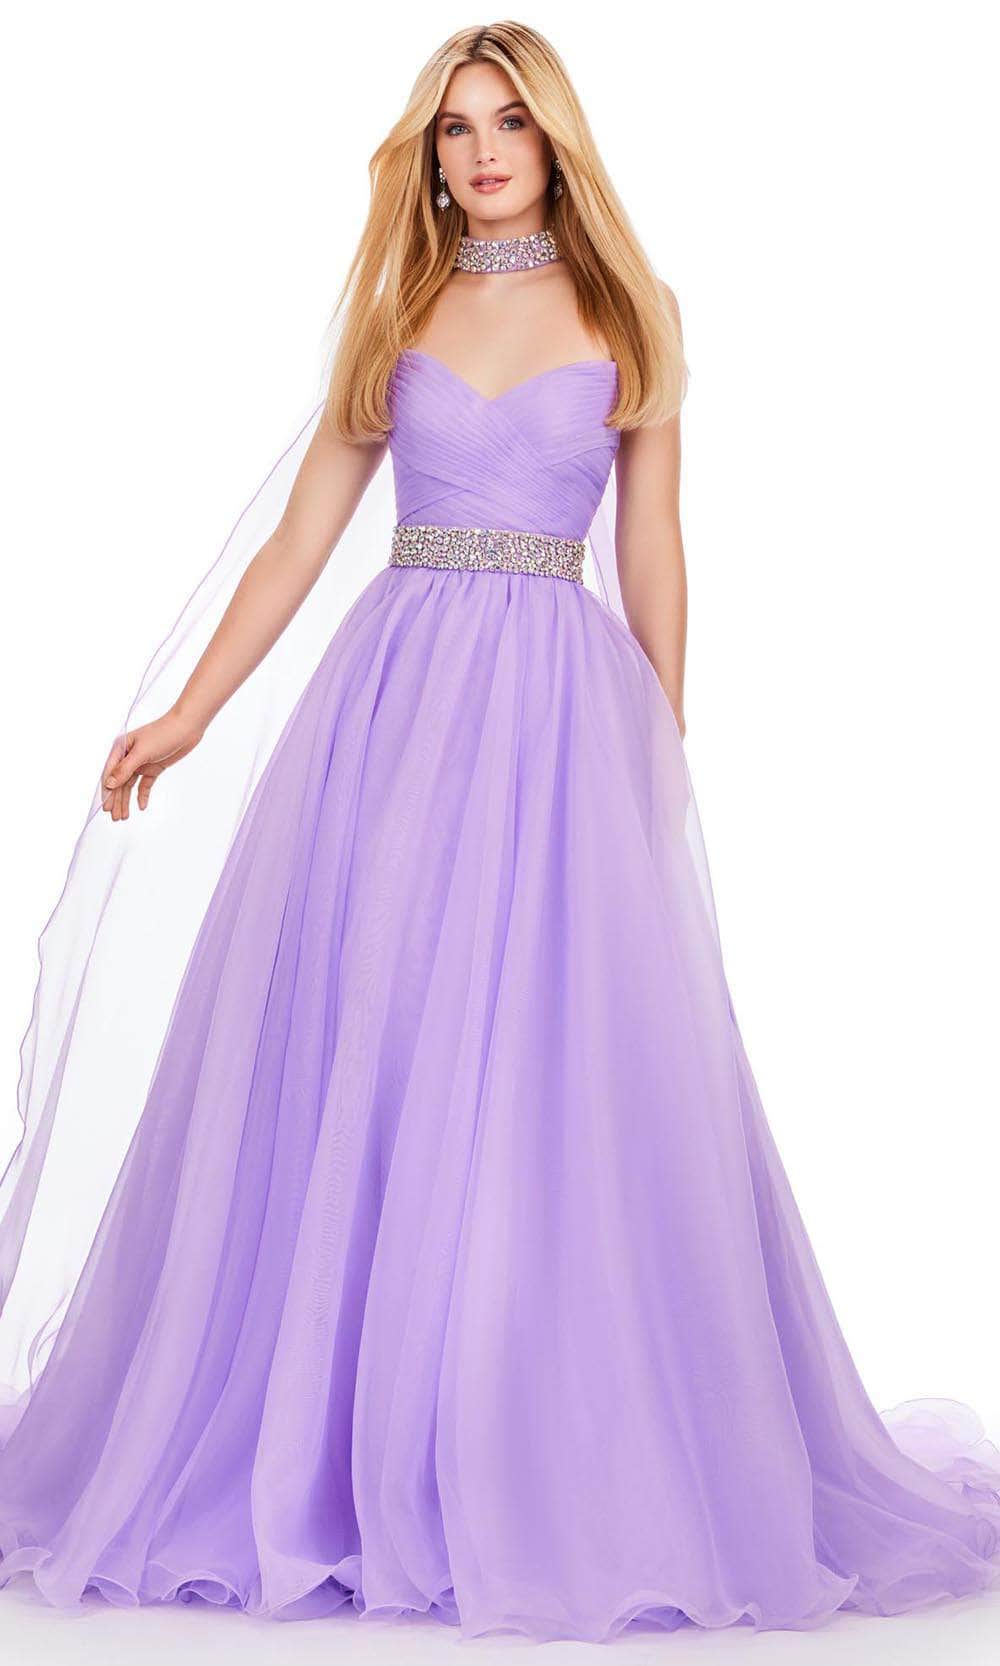 Ashley Lauren 11565 - Strapless Ballgown with Cape 00 /  Orchid